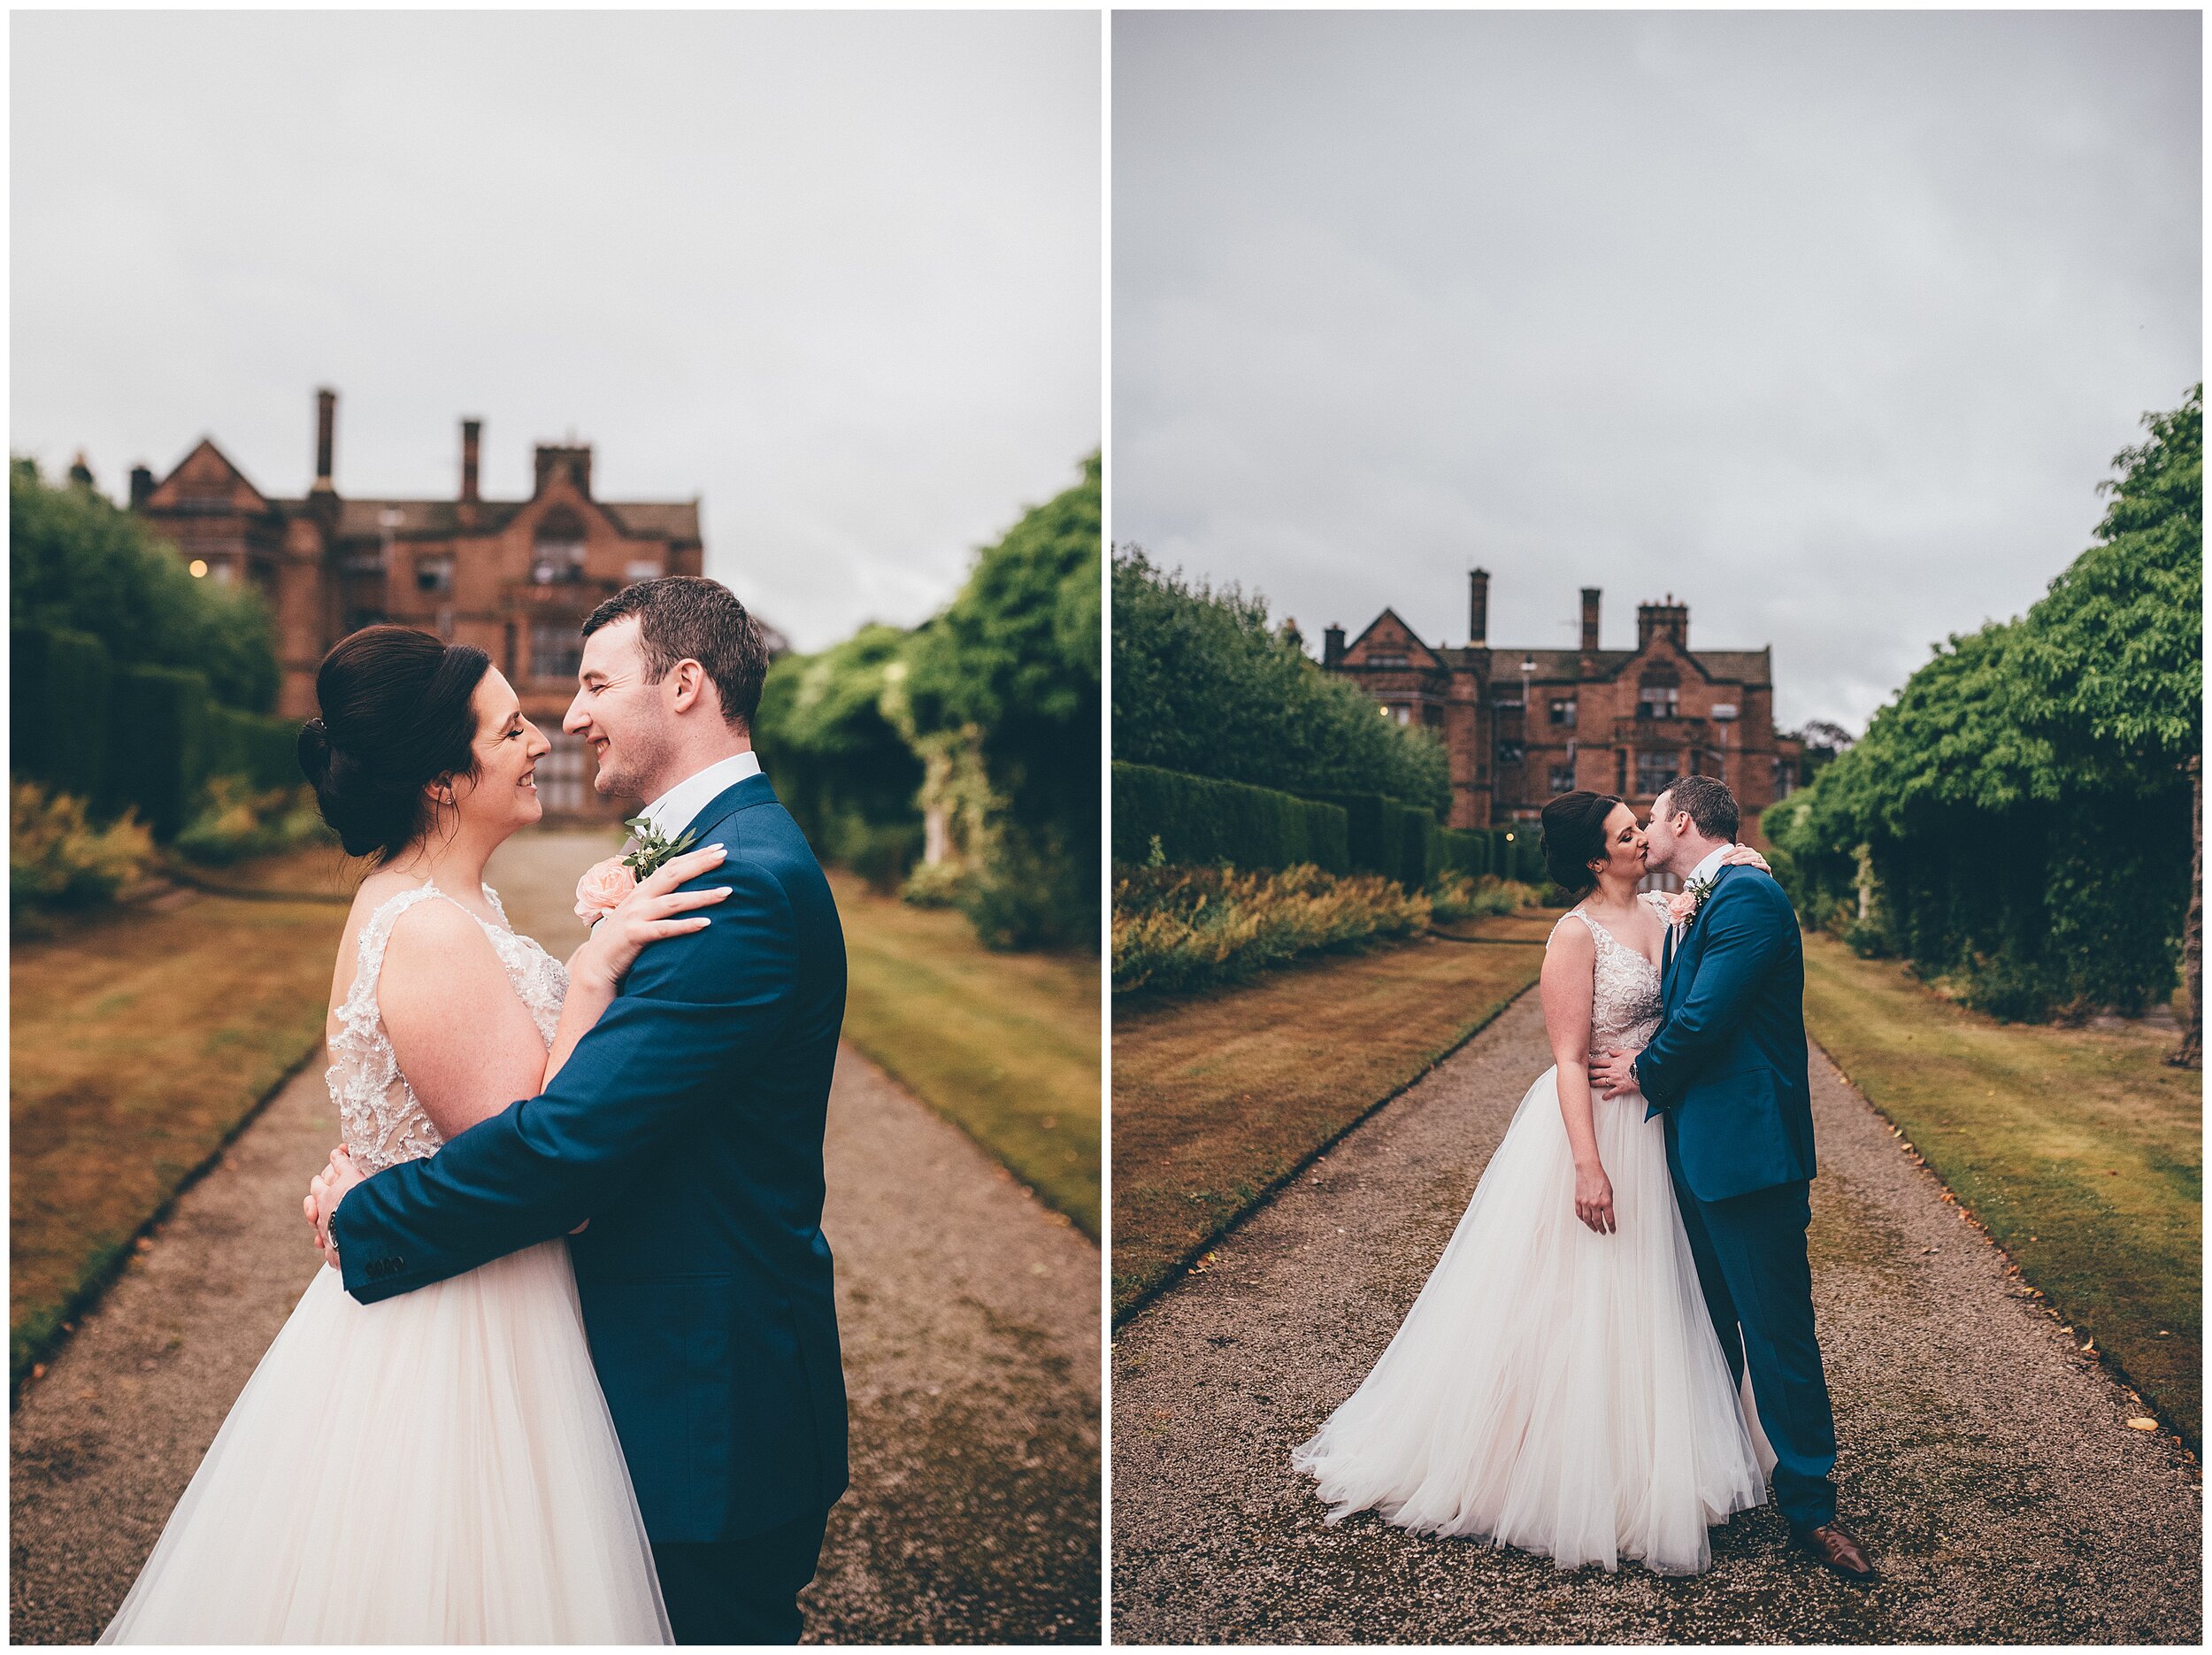 Bride and groom candid photographs at Thornton Manor.